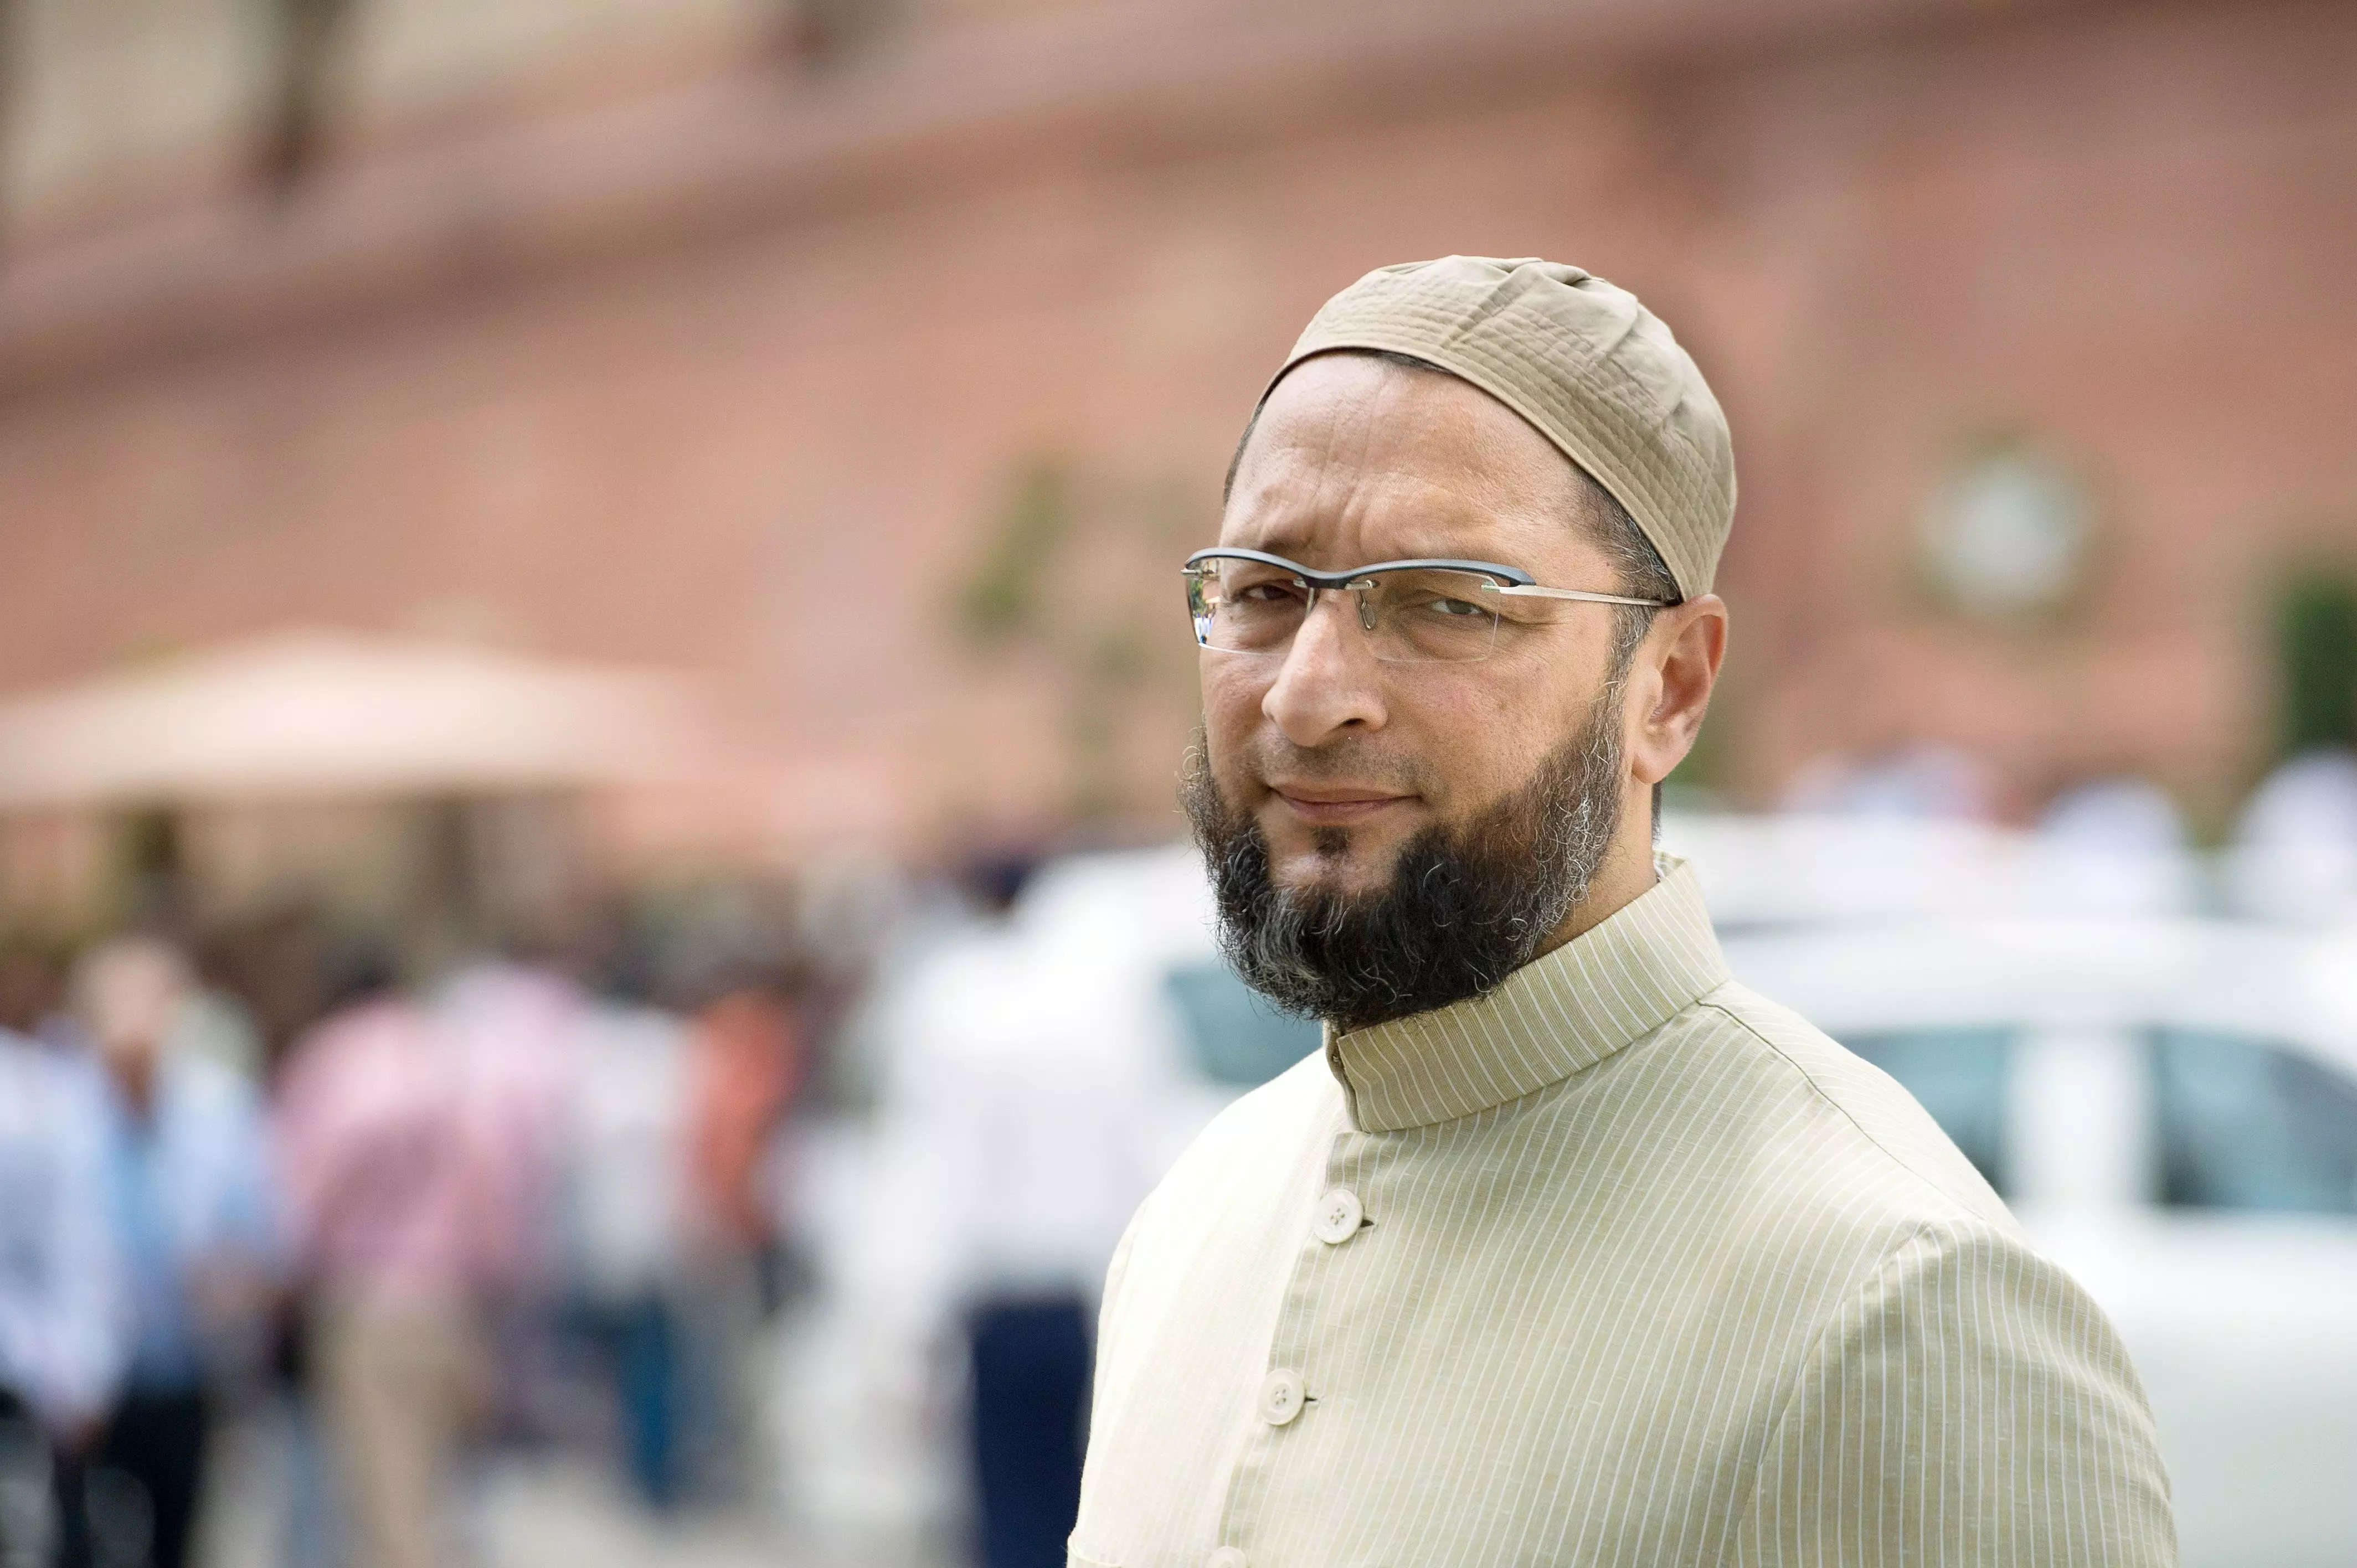 Owaisi said India should not have played the match against Pakistan at a time when Indians were being killed by Pakistan-sponsored terrorists in Kashmir.